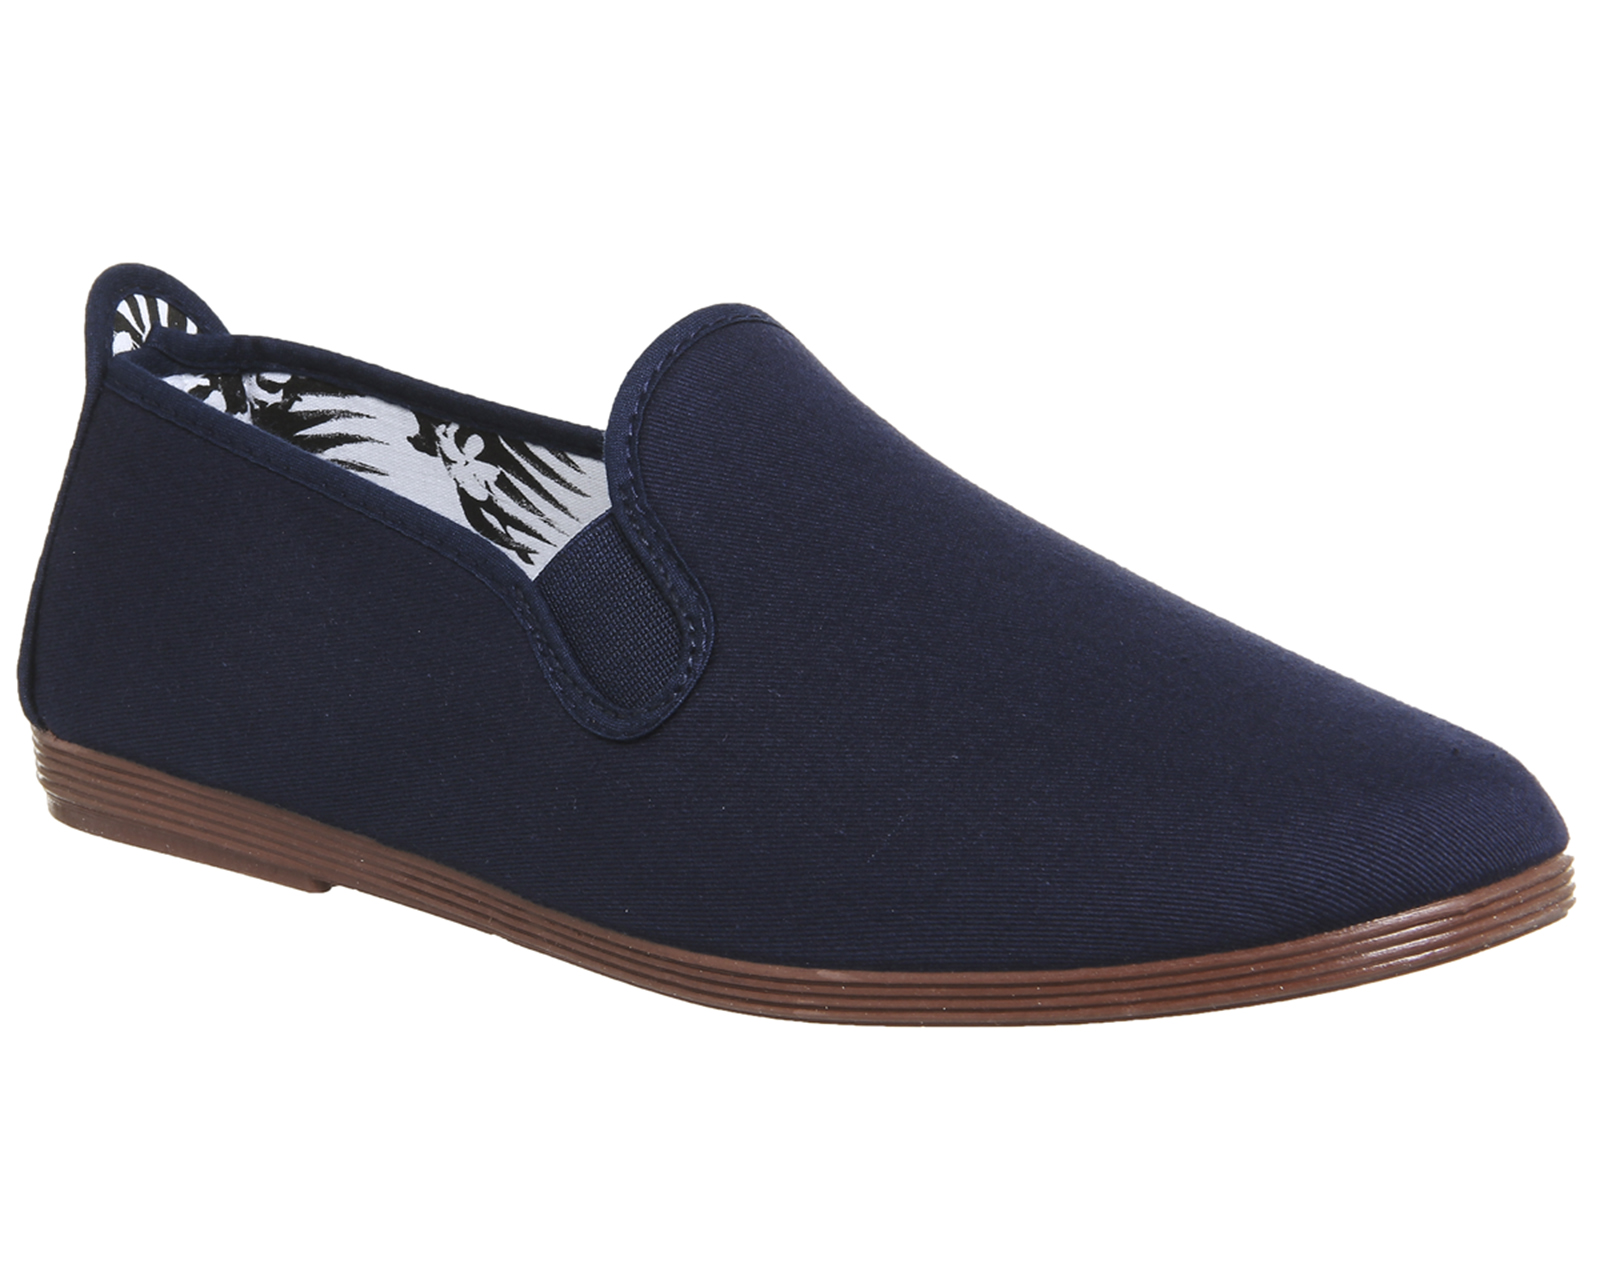 Flossy Flossy Plimsolls Flats Navy Canvas - Men's Casual Shoes